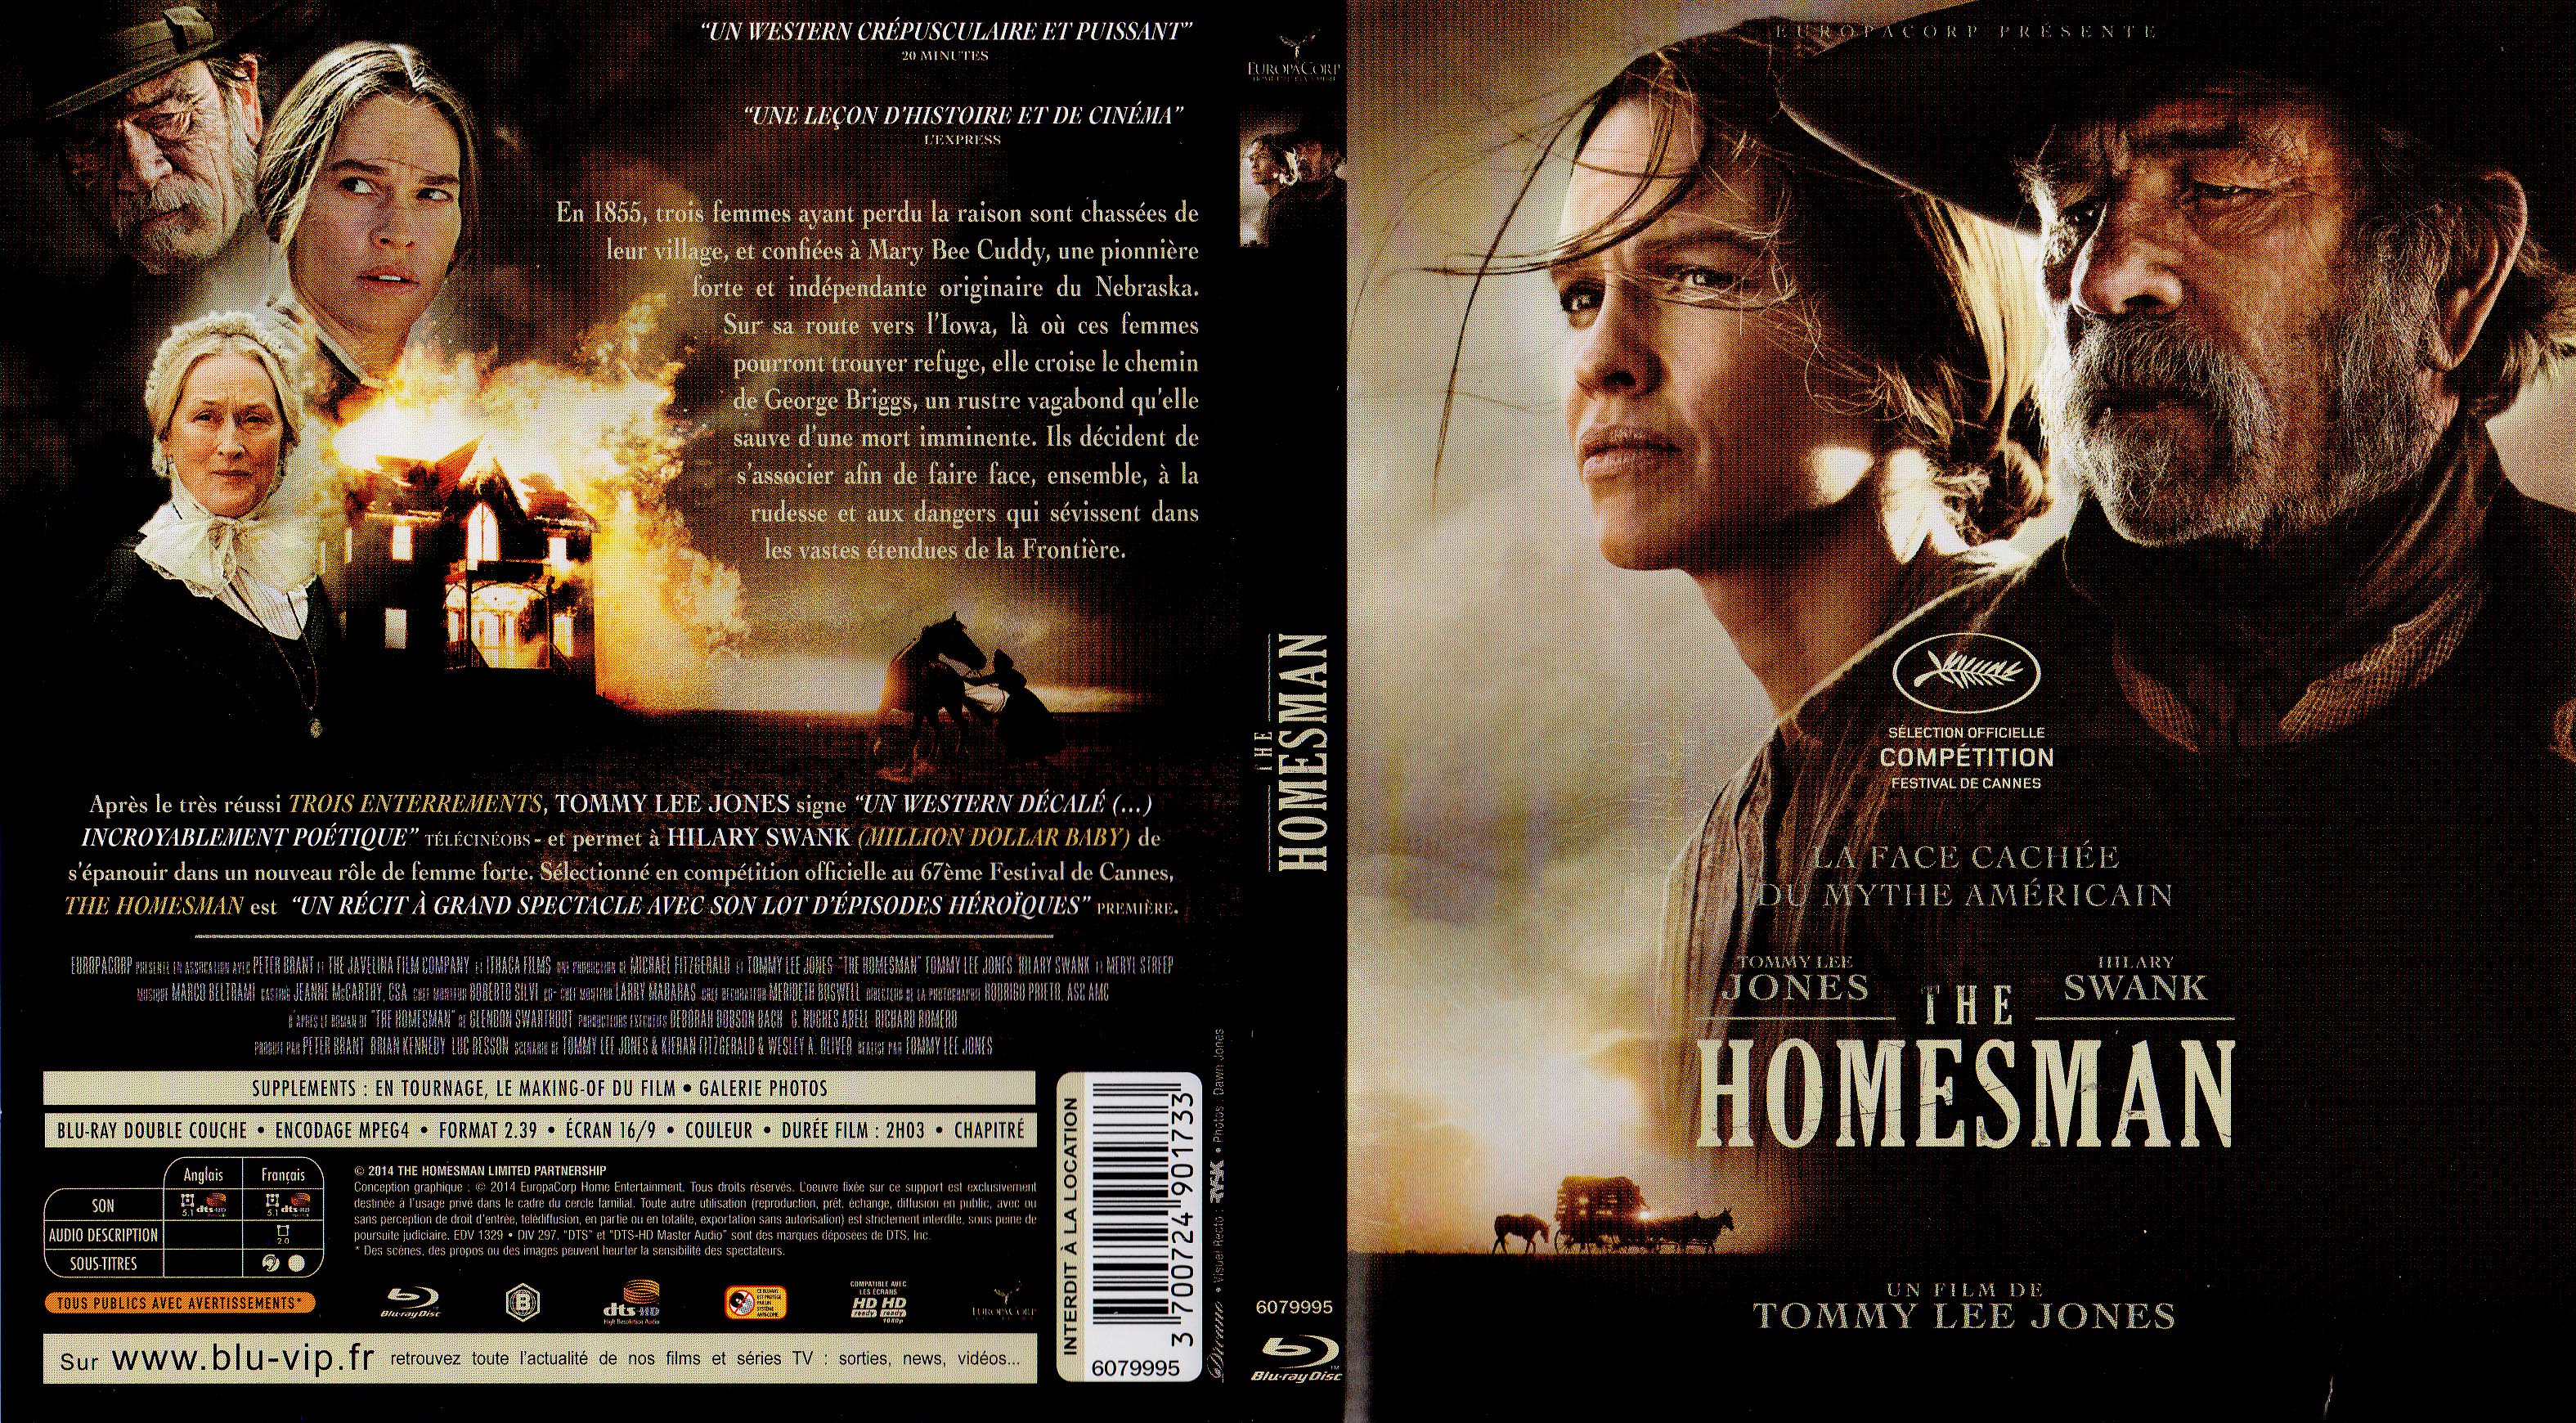 Jaquette DVD The homesman (BLU-RAY)